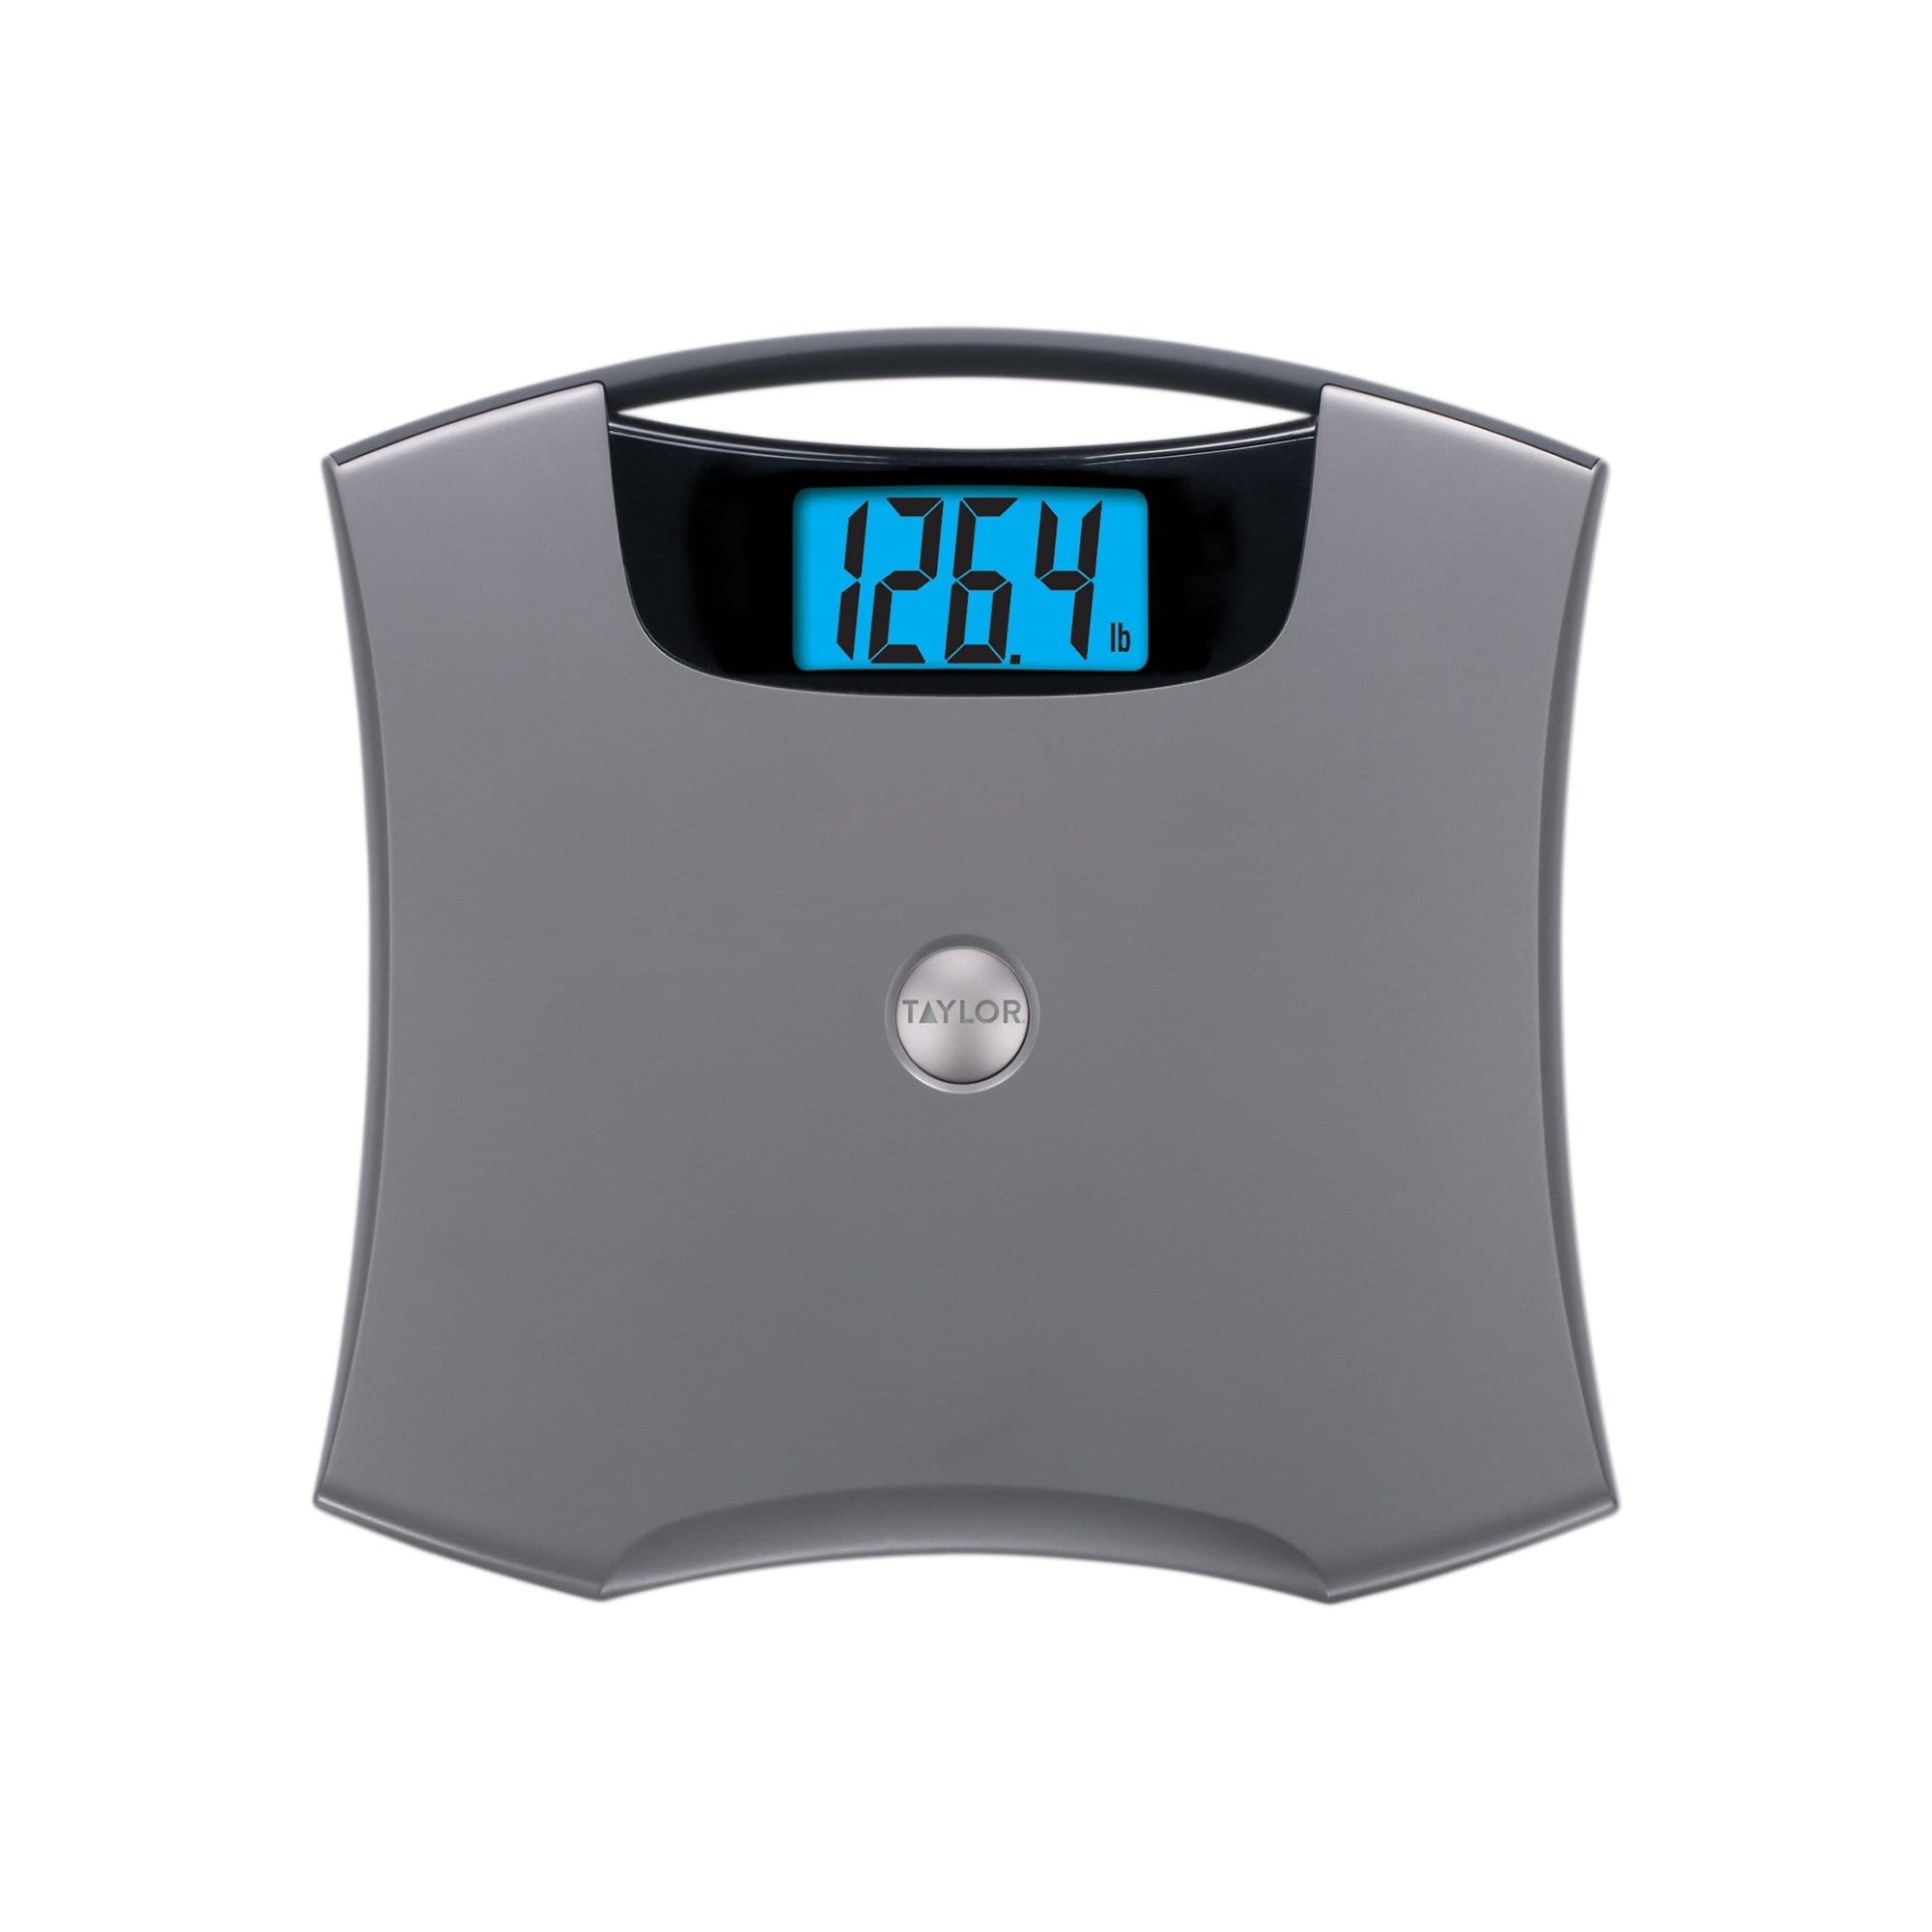 Digital Bathroom Scale with Extra Large Backlit Display, 7405